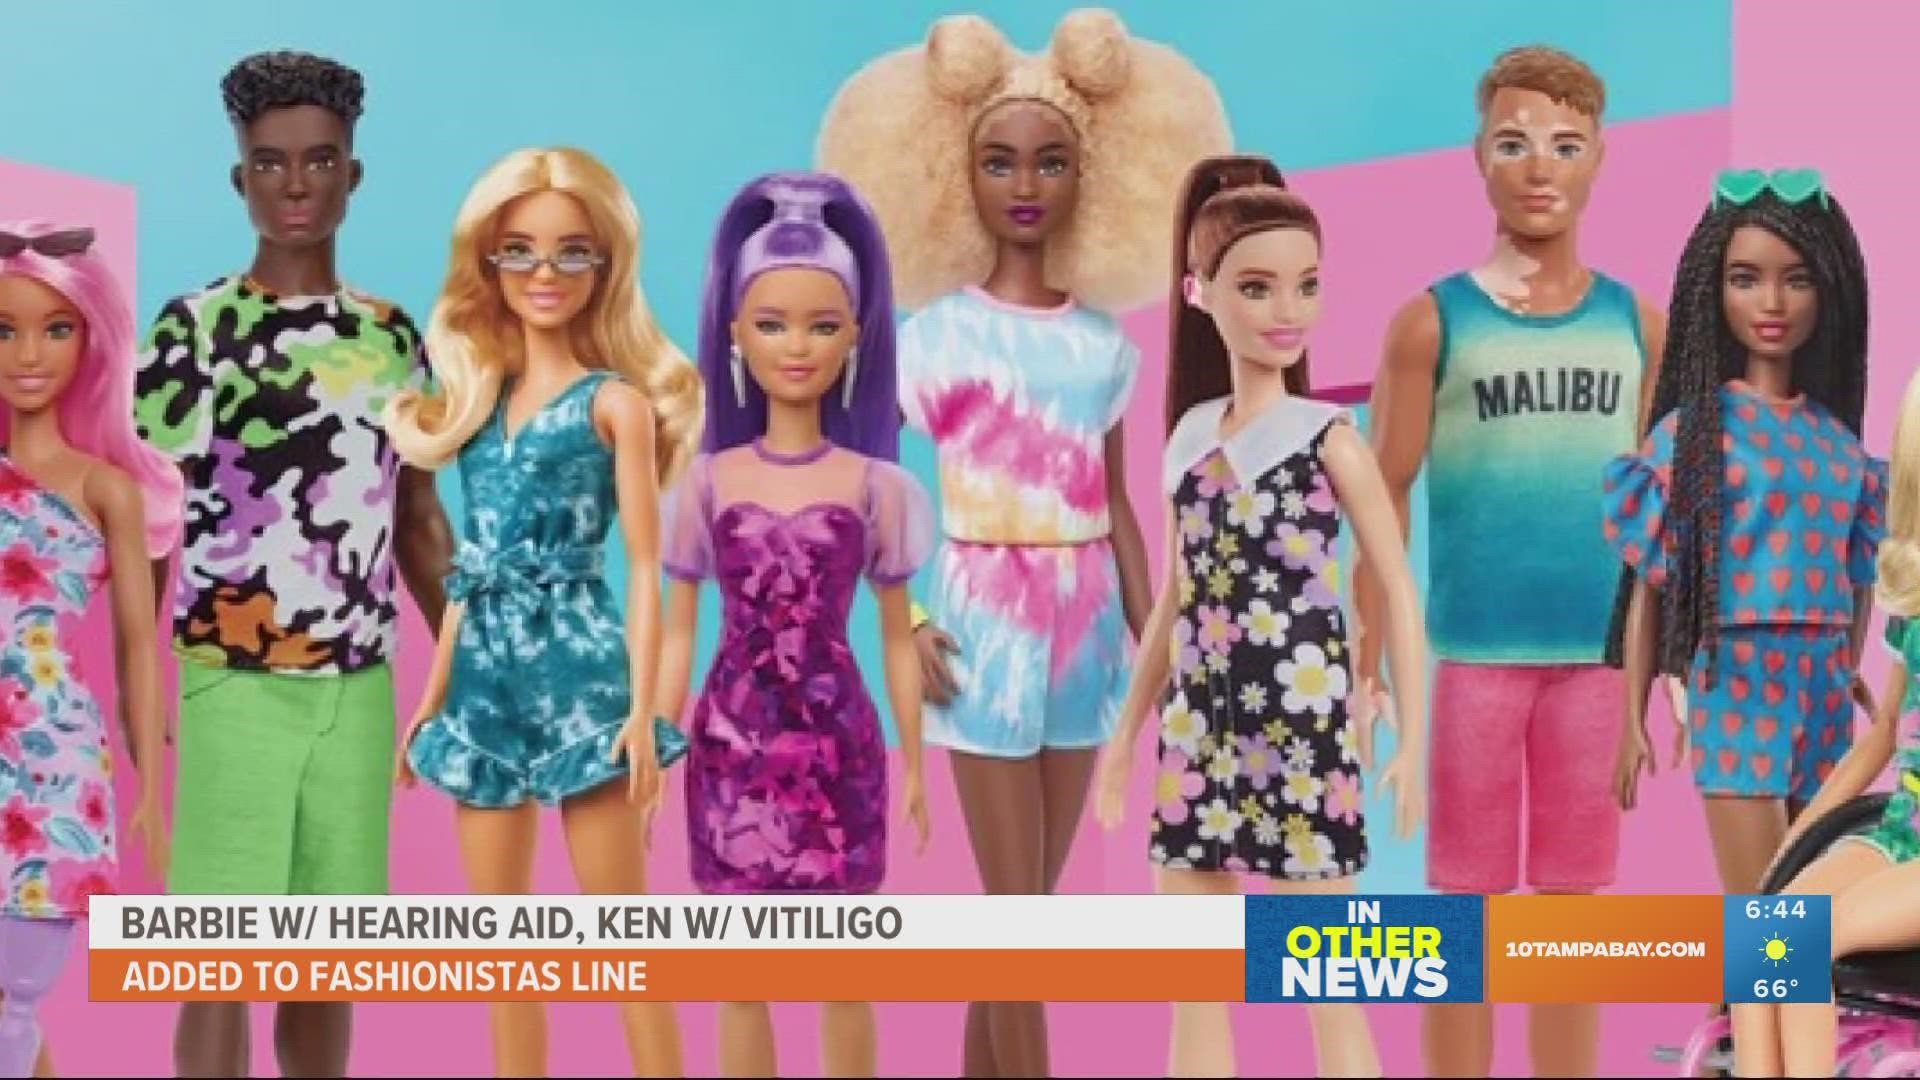 Barbie's newest additions to its Fashionistas line features dolls with conditions meant to diversify the type of people see and interact with.